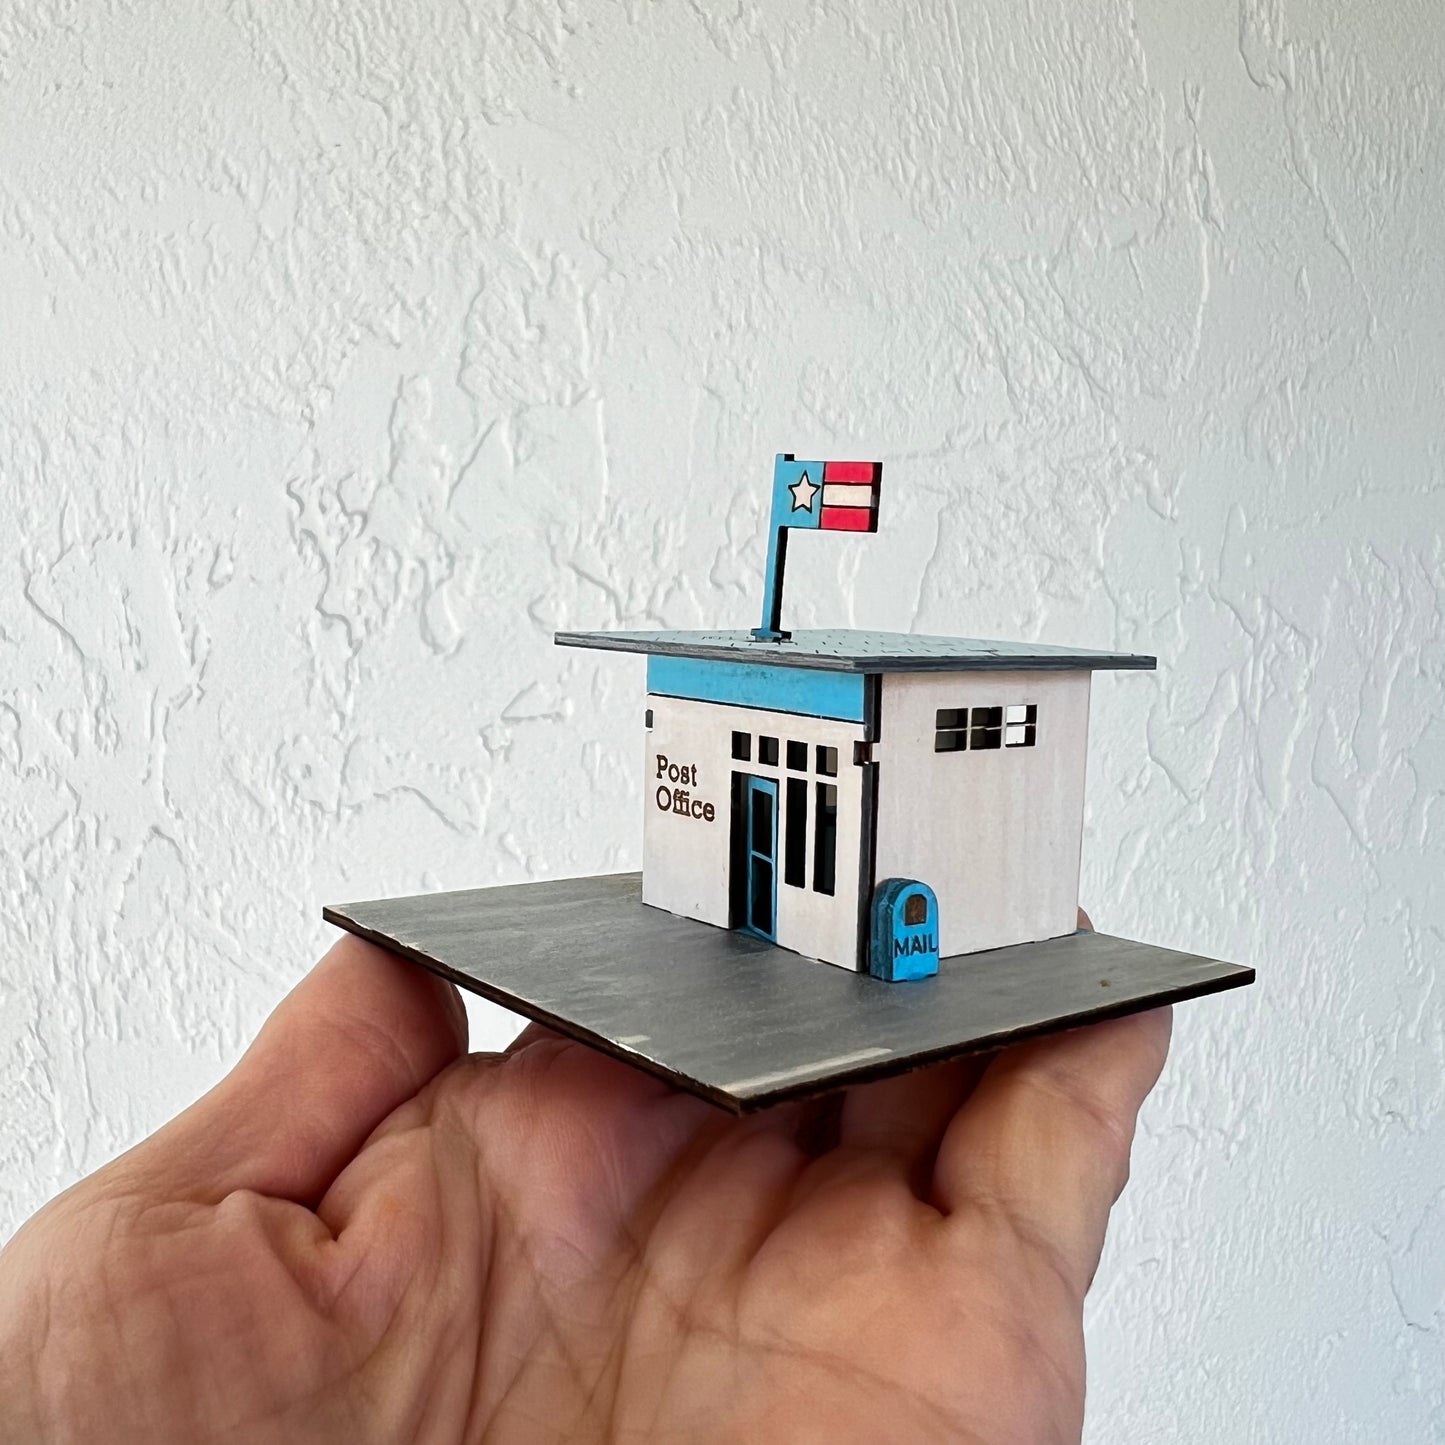 The Post Office, Mini Town Building Kits 1:144